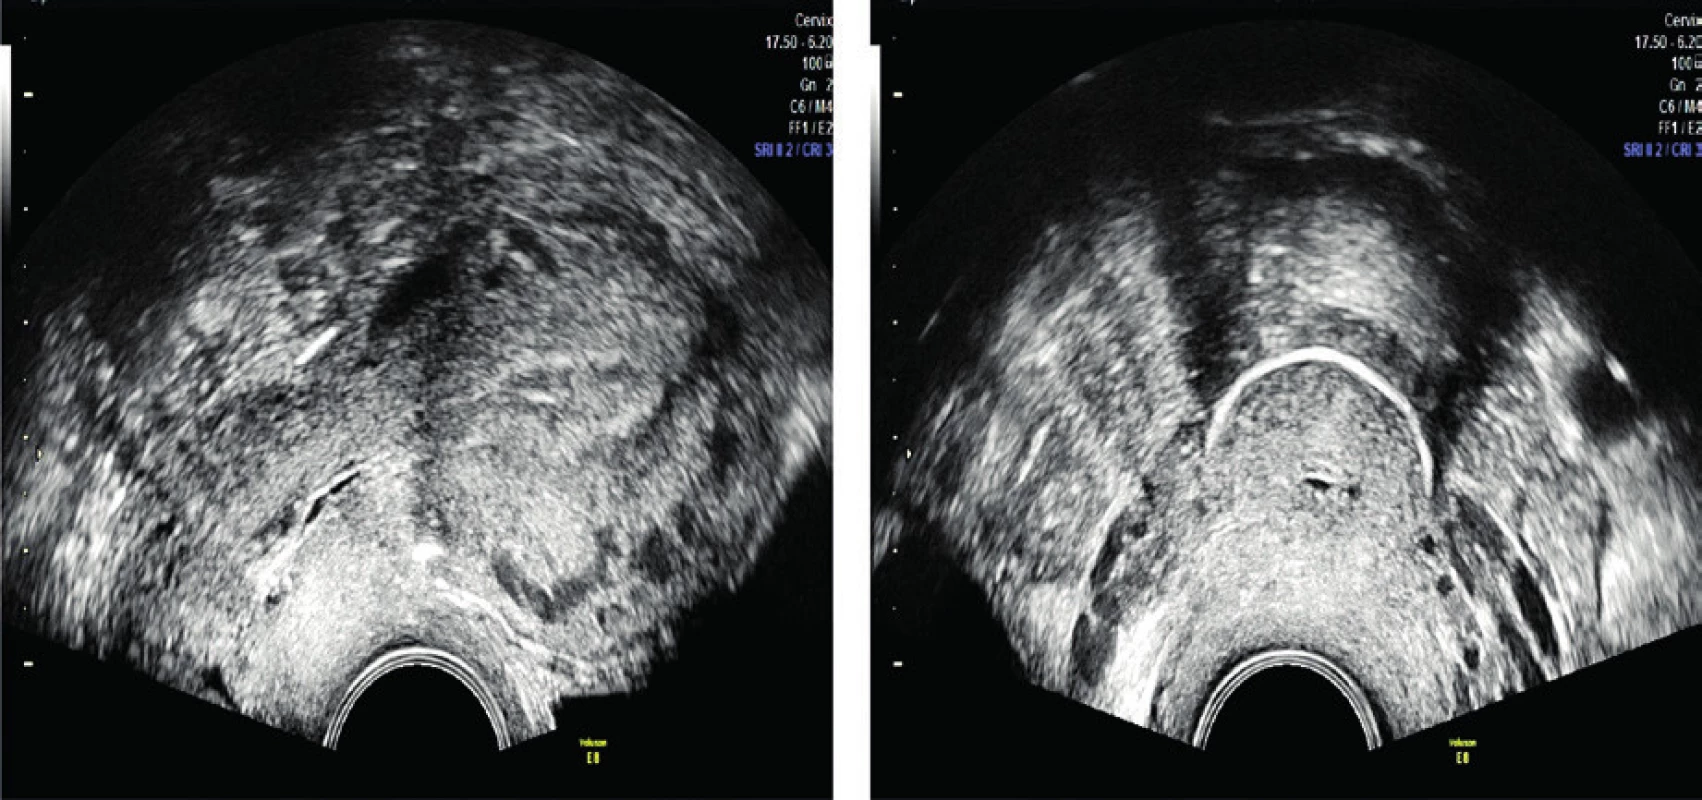 Ultrasound verification of correct placement of the
cerclage after the procedure in the first case